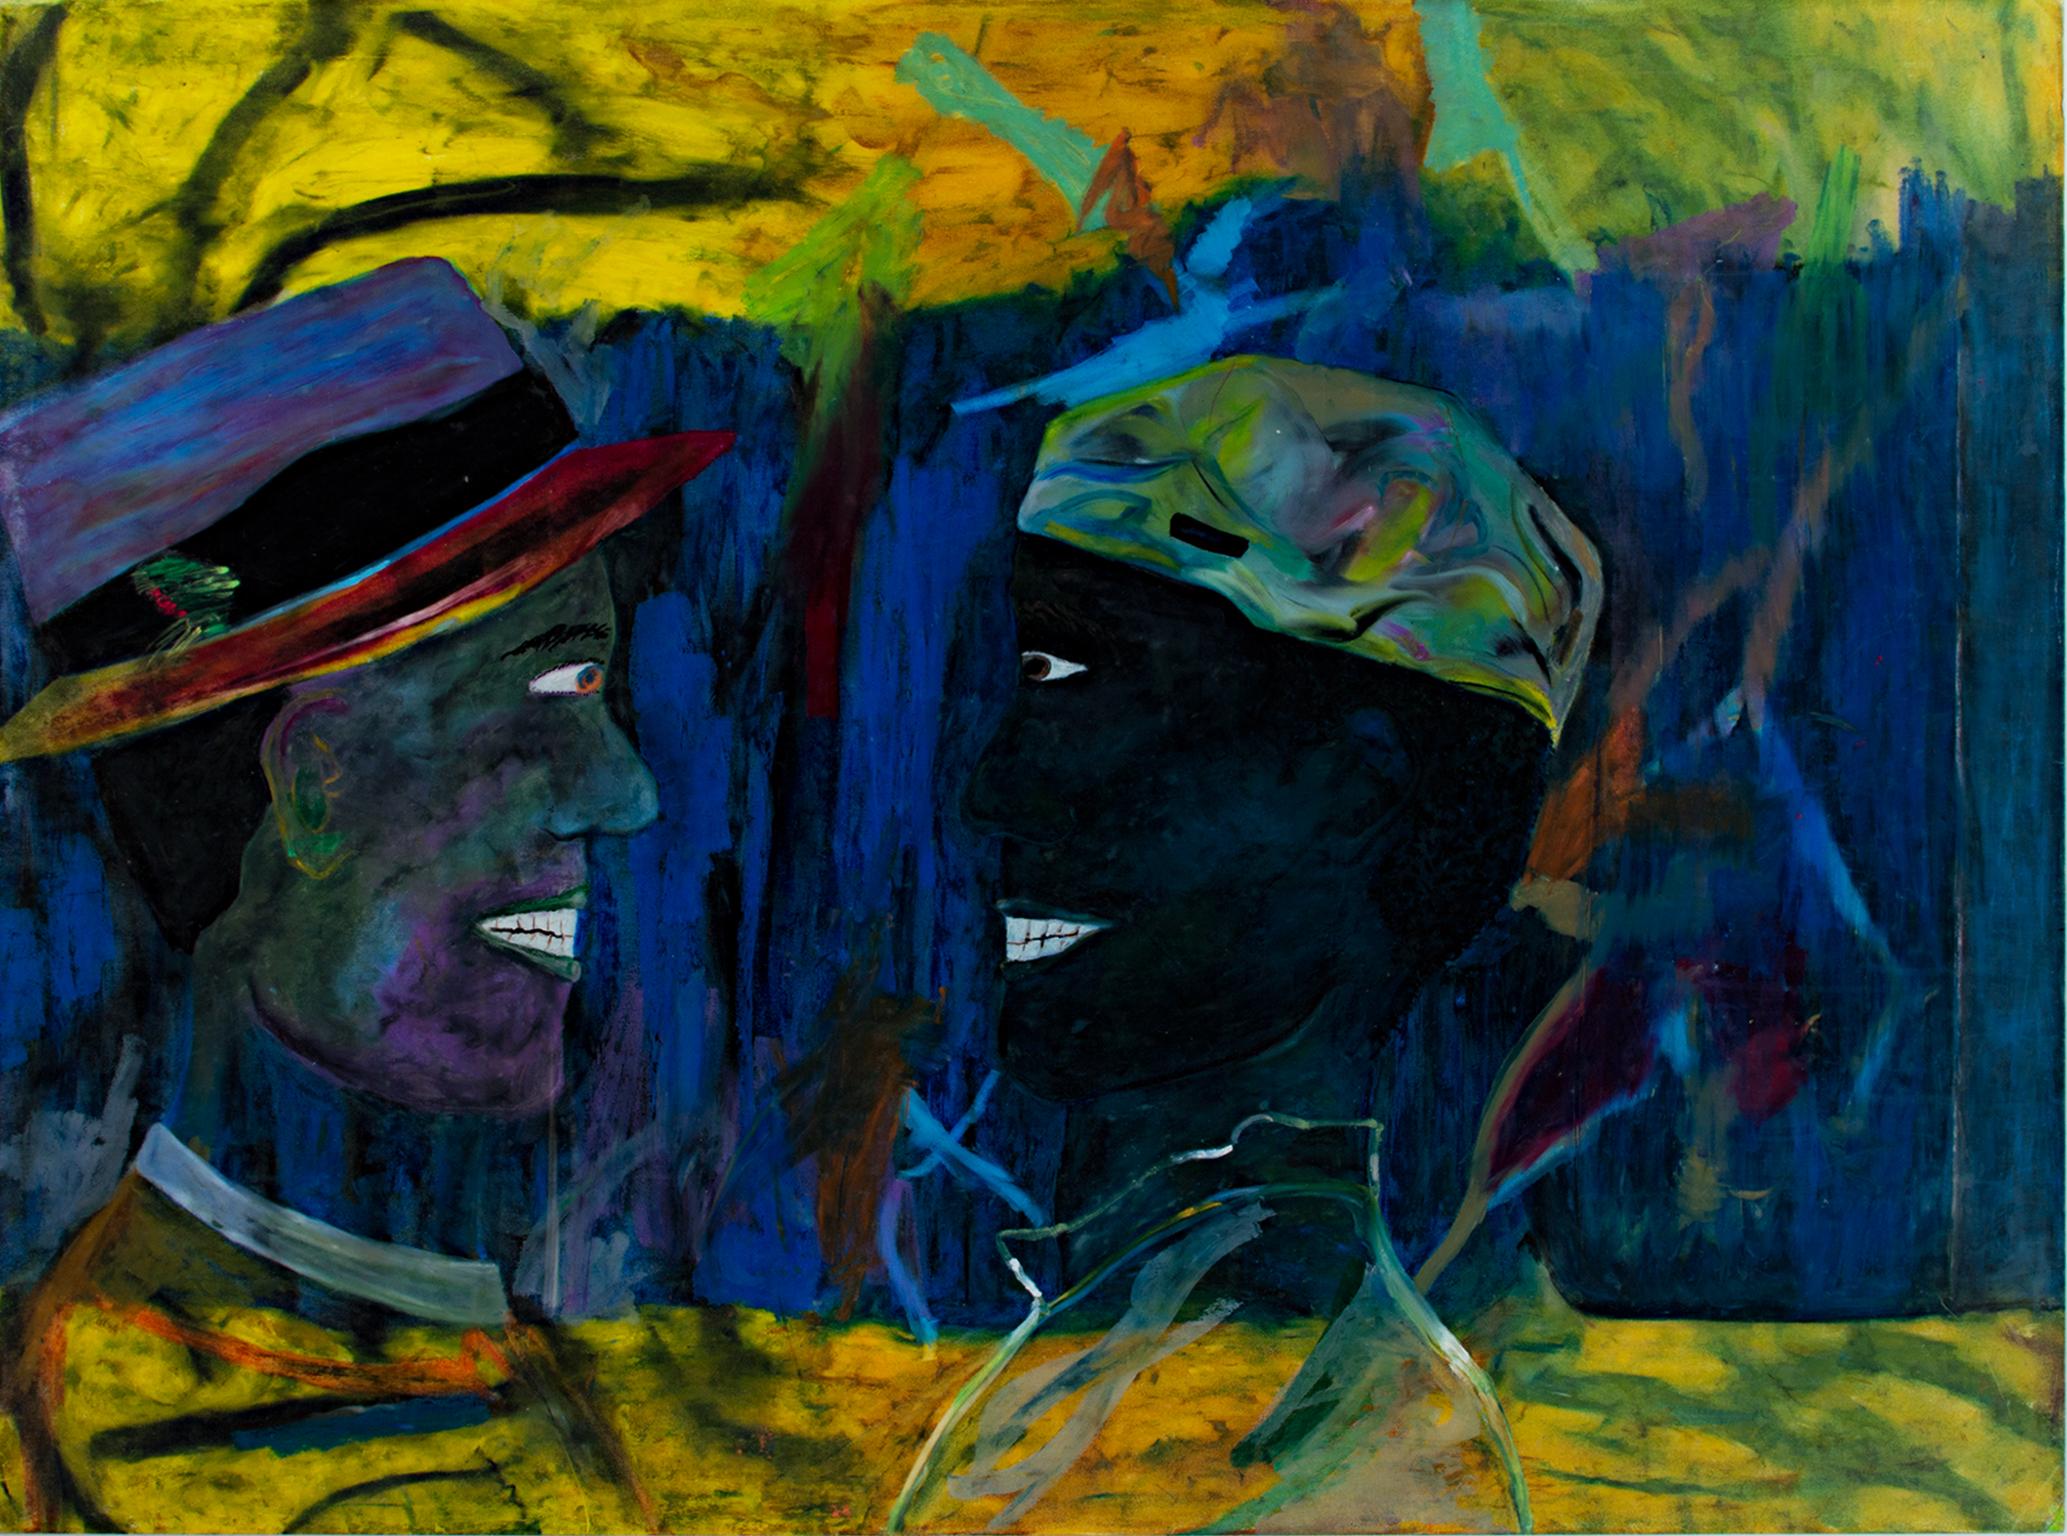 Reginald K. Gee Figurative Art - "Two Foreign Pen Pals Meet at the Airport in a Mutually Foreign Country" by Gee